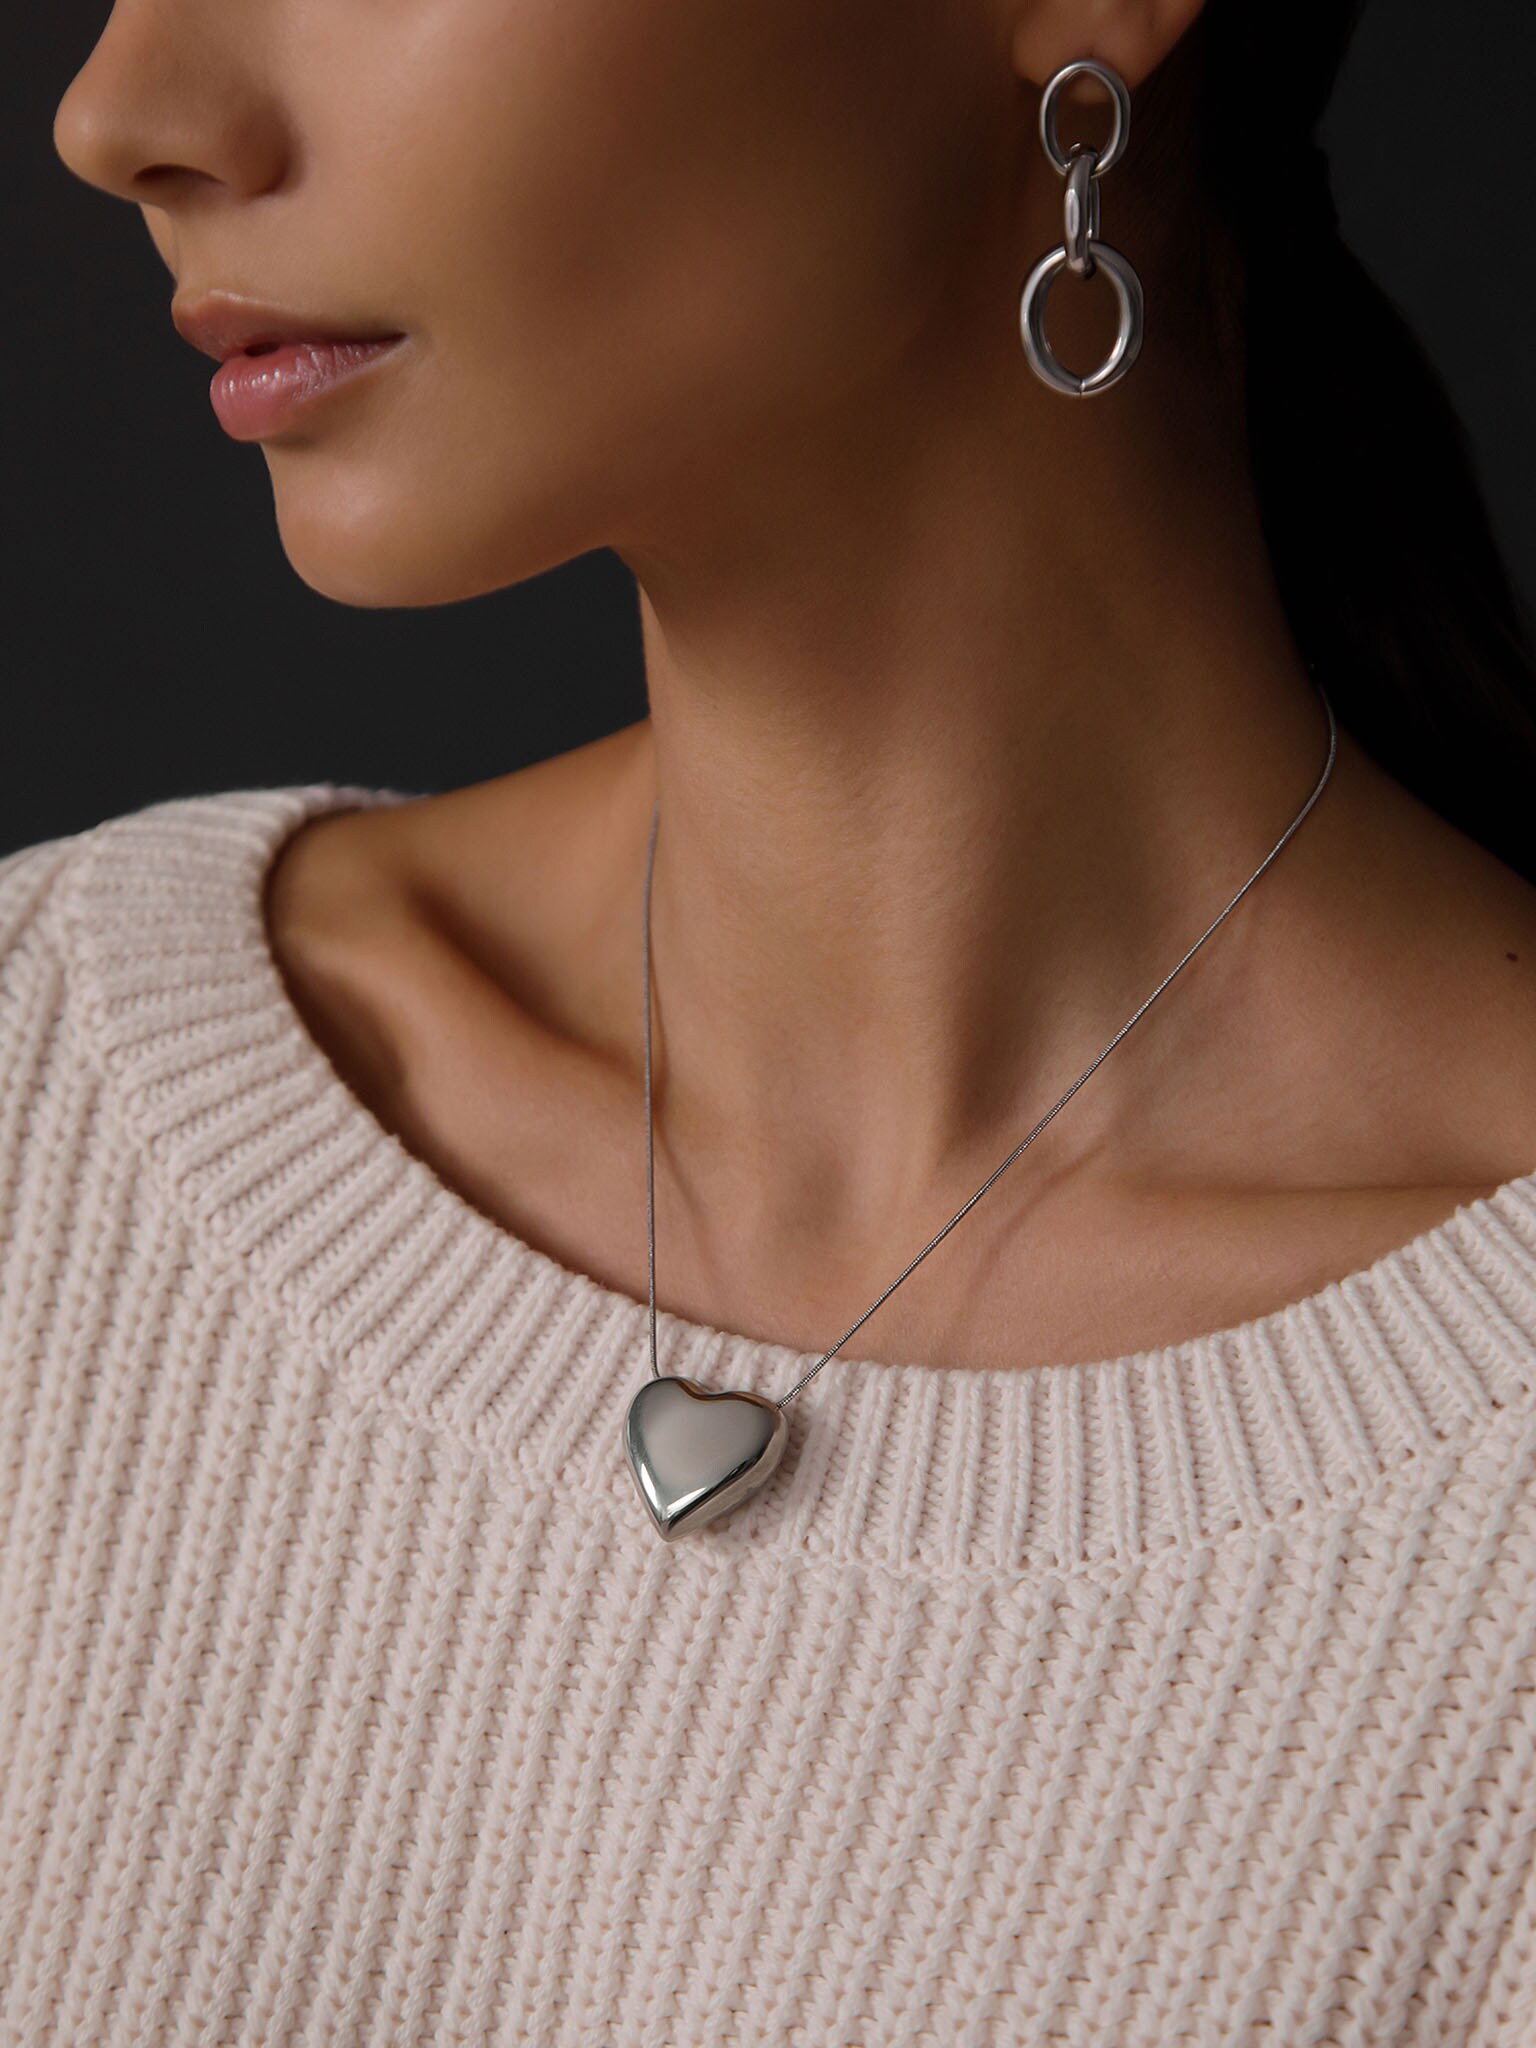 Chunky heart pendant chain necklace